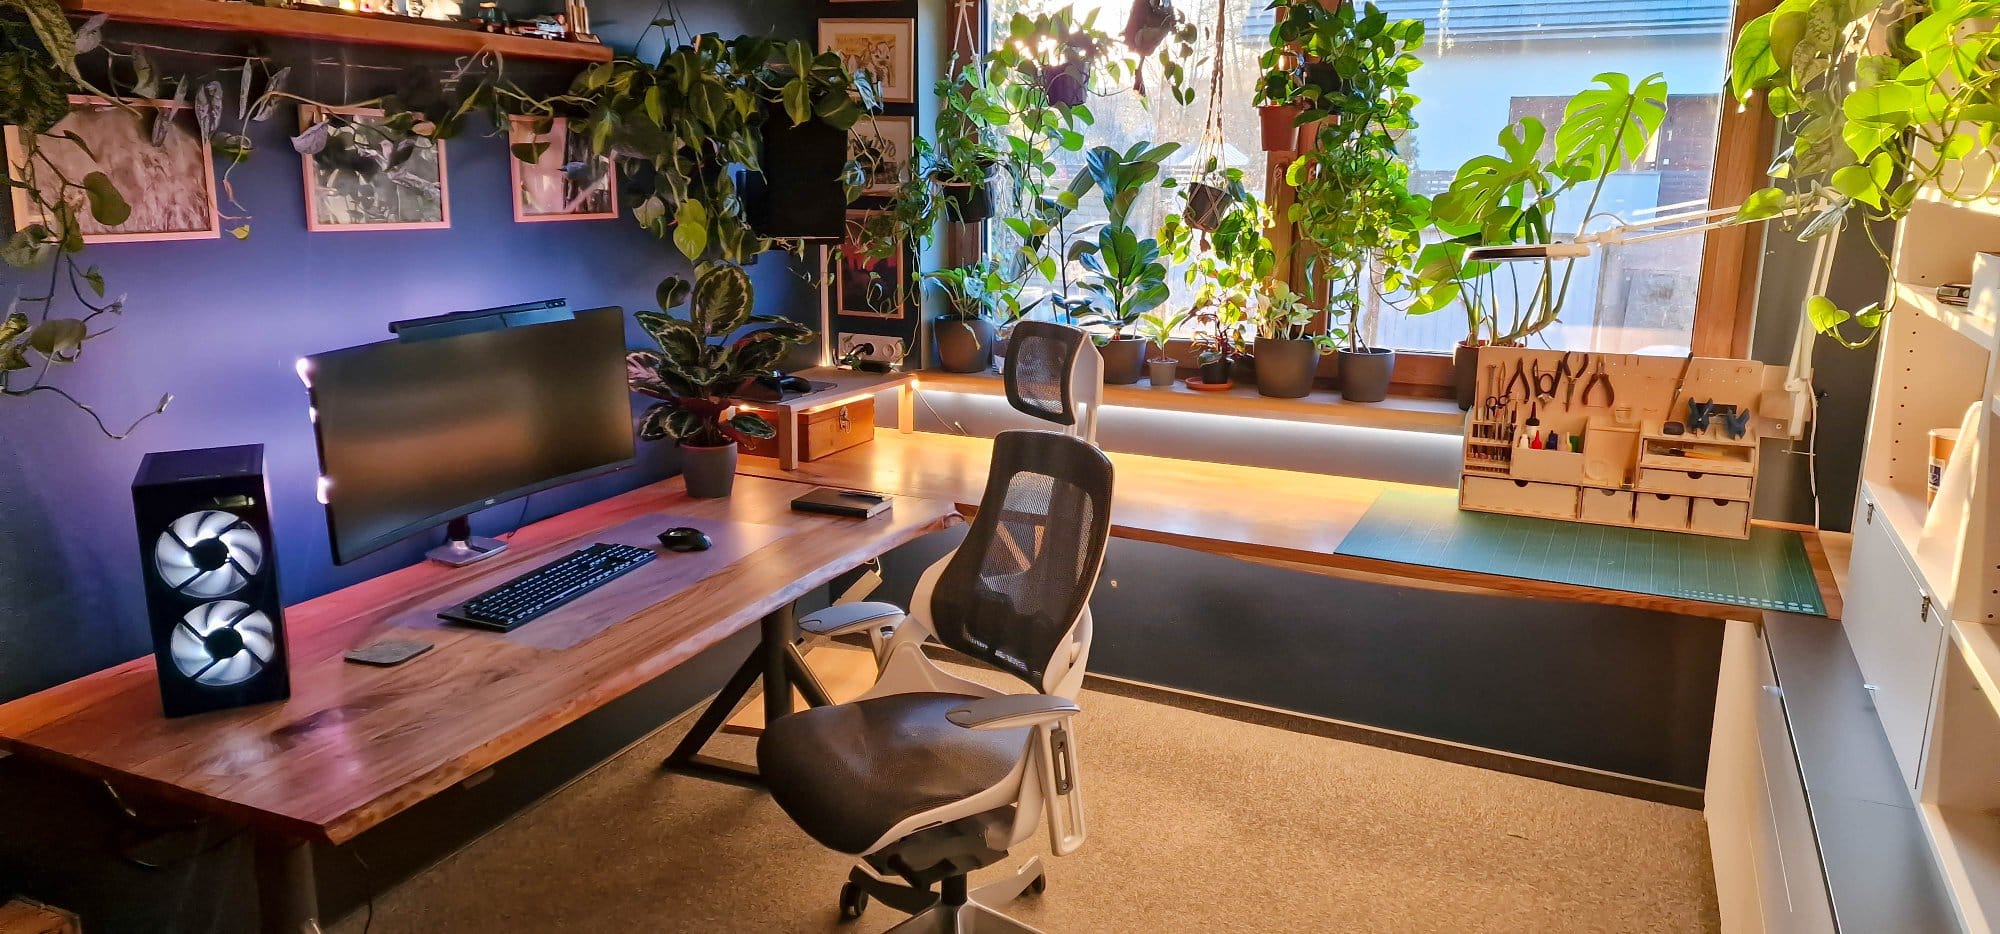 A well-lit and inviting home office setup featuring a wide wooden desk, ergonomic chairs, multiple houseplants, and a dedicated crafting area by a sunlit window